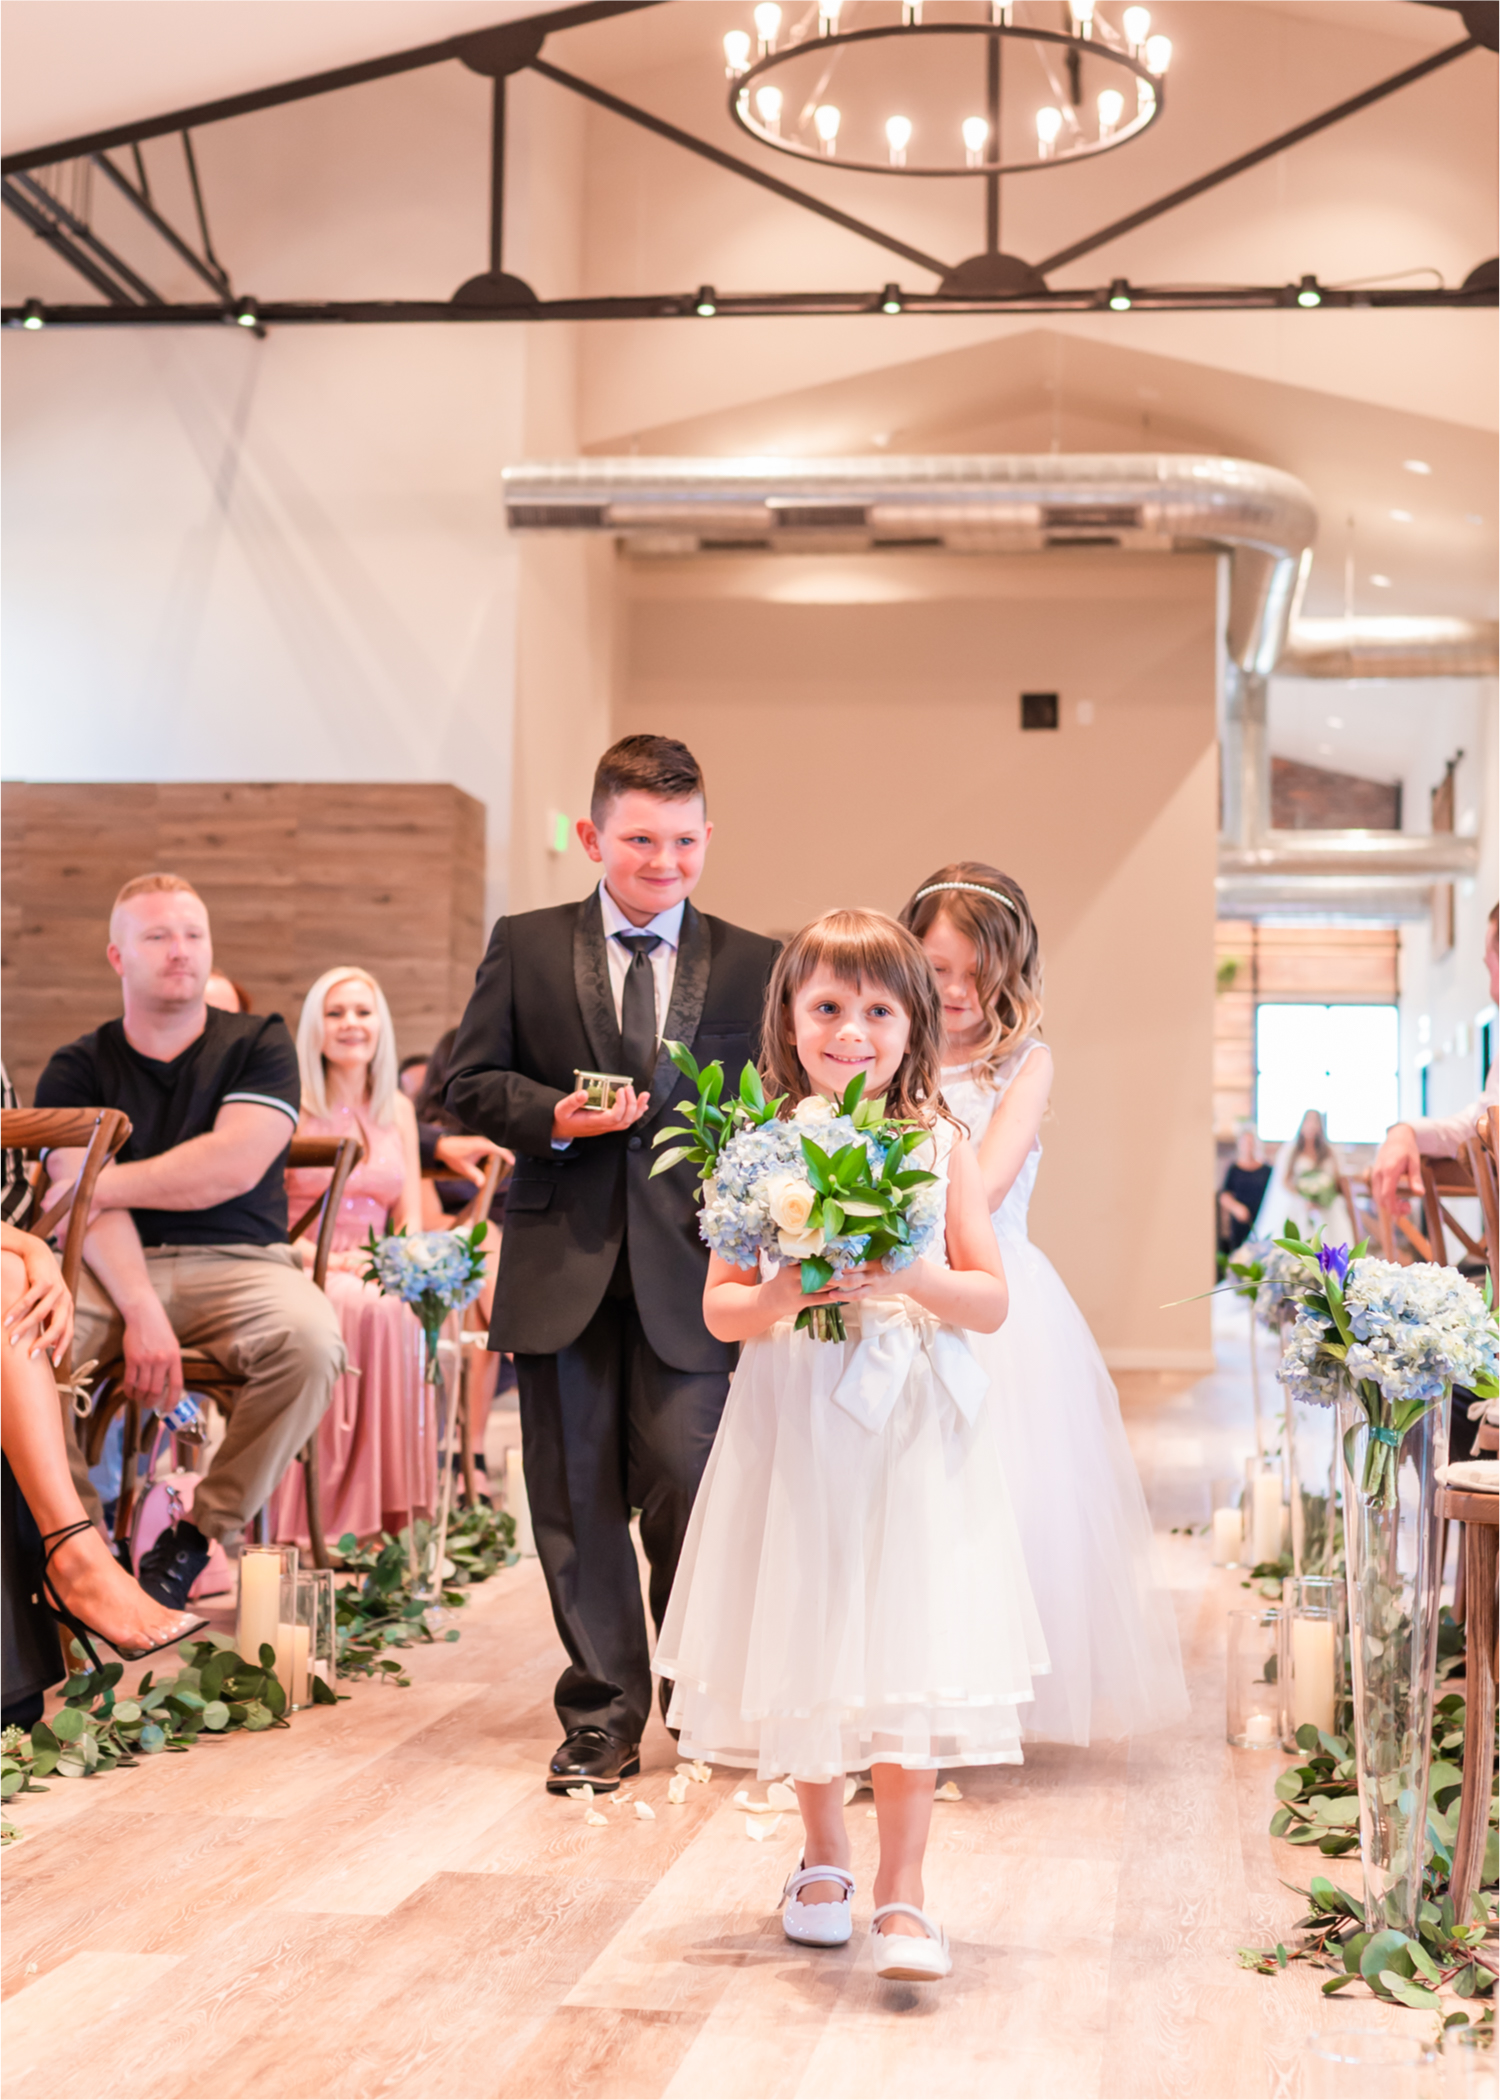 Romantic and Rustic Wedding at The Mill in Windsor | Britni Girard Photography | Colorado based wedding photography and videography team | Royal Blue and white Wedding - flower girl